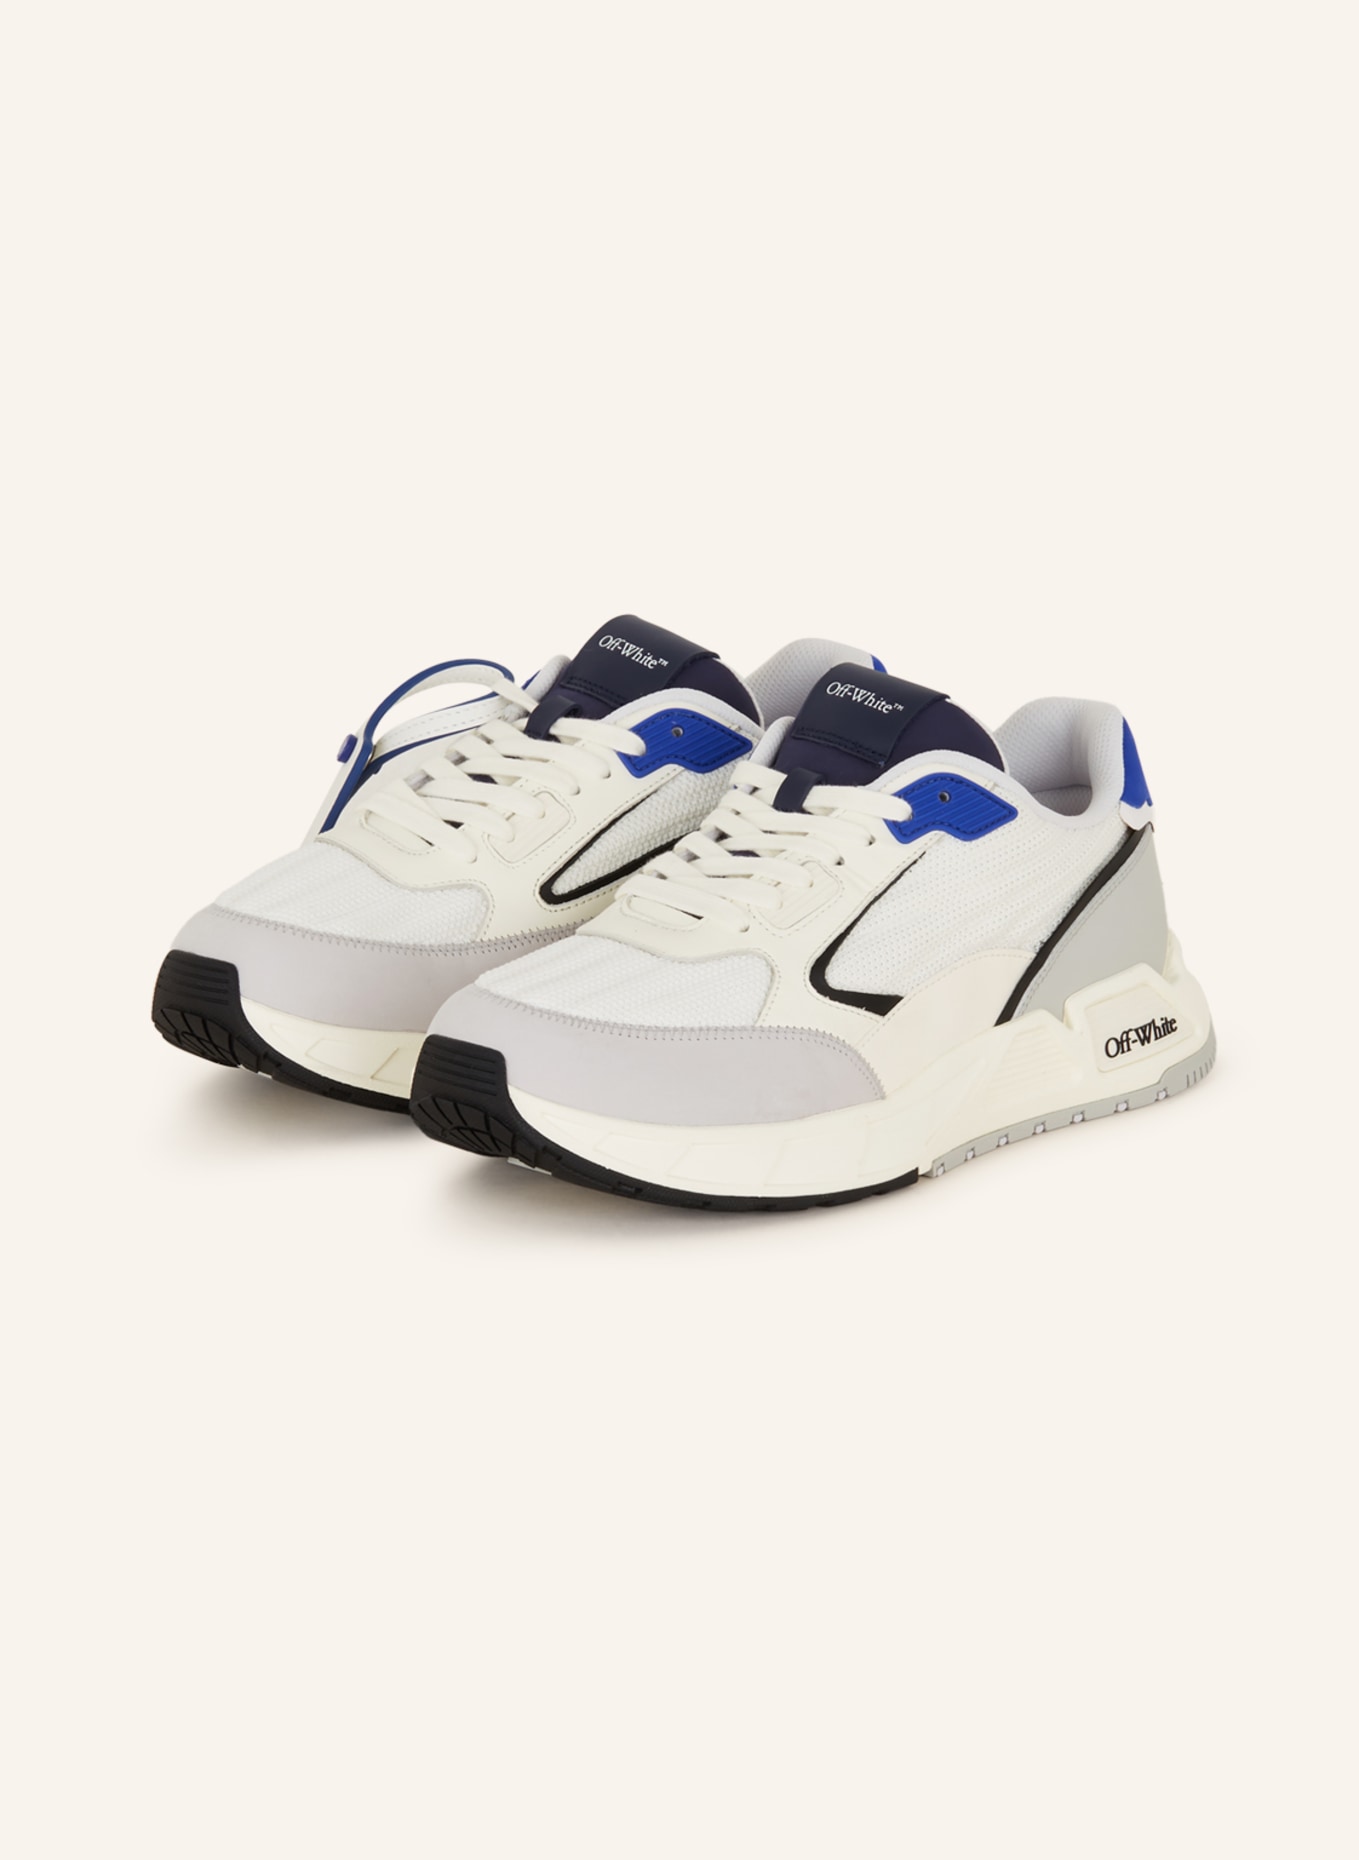 Buy Puma Men Off White Emergence Running Shoes - Sports Shoes for Men  8476527 | Myntra